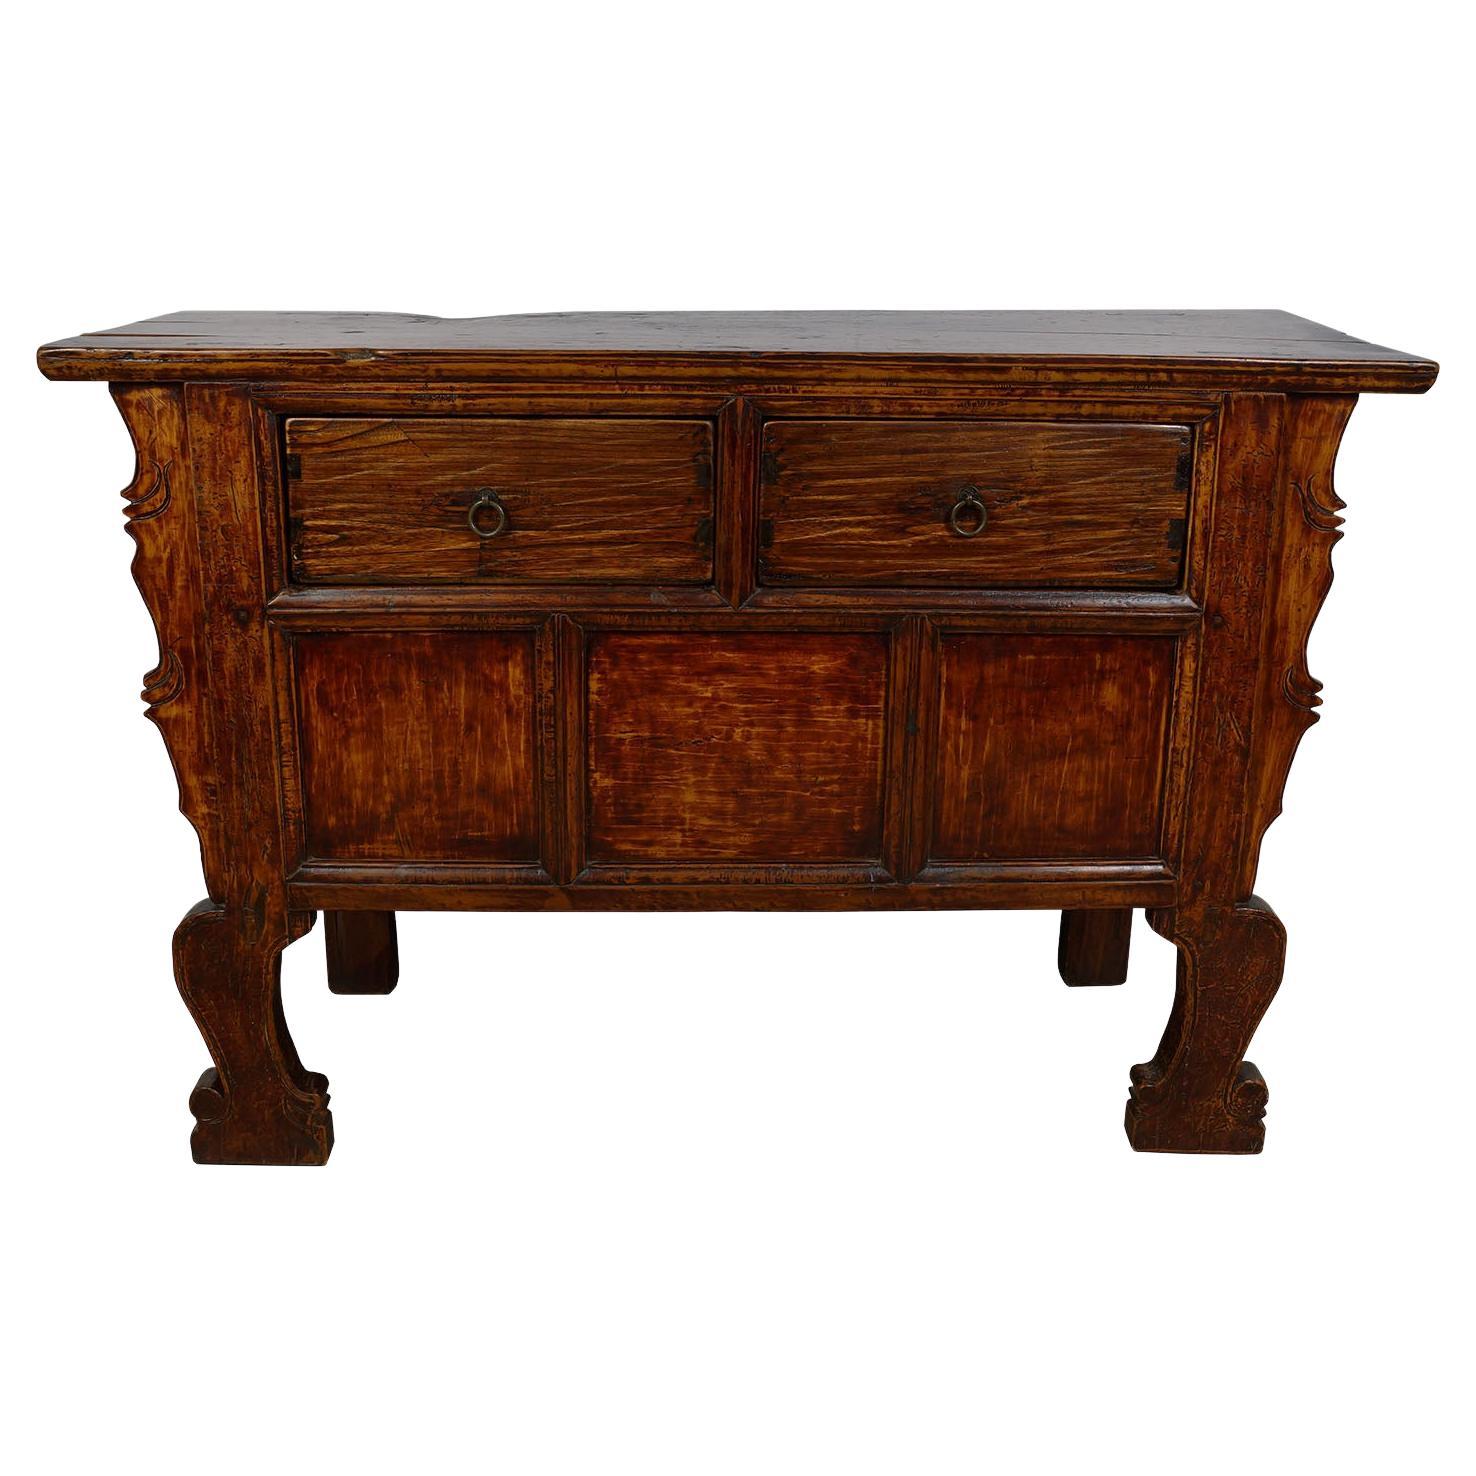 19th Century Antique Chinese Credenza, Sideboard, Buffet Table For Sale